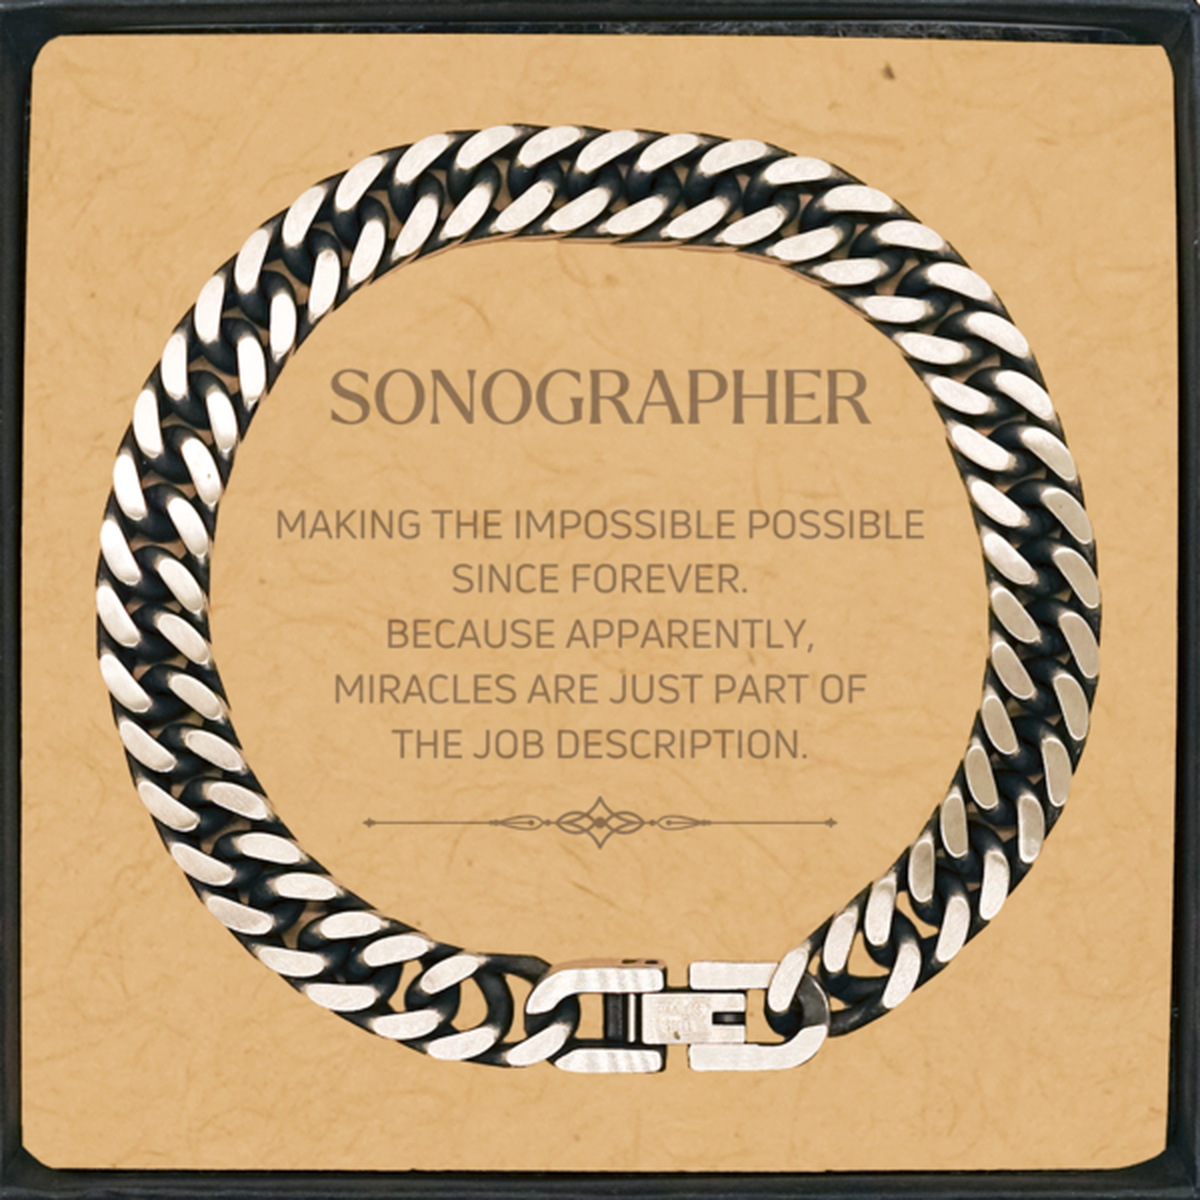 Funny Sonographer Gifts, Miracles are just part of the job description, Inspirational Birthday Cuban Link Chain Bracelet For Sonographer, Men, Women, Coworkers, Friends, Boss